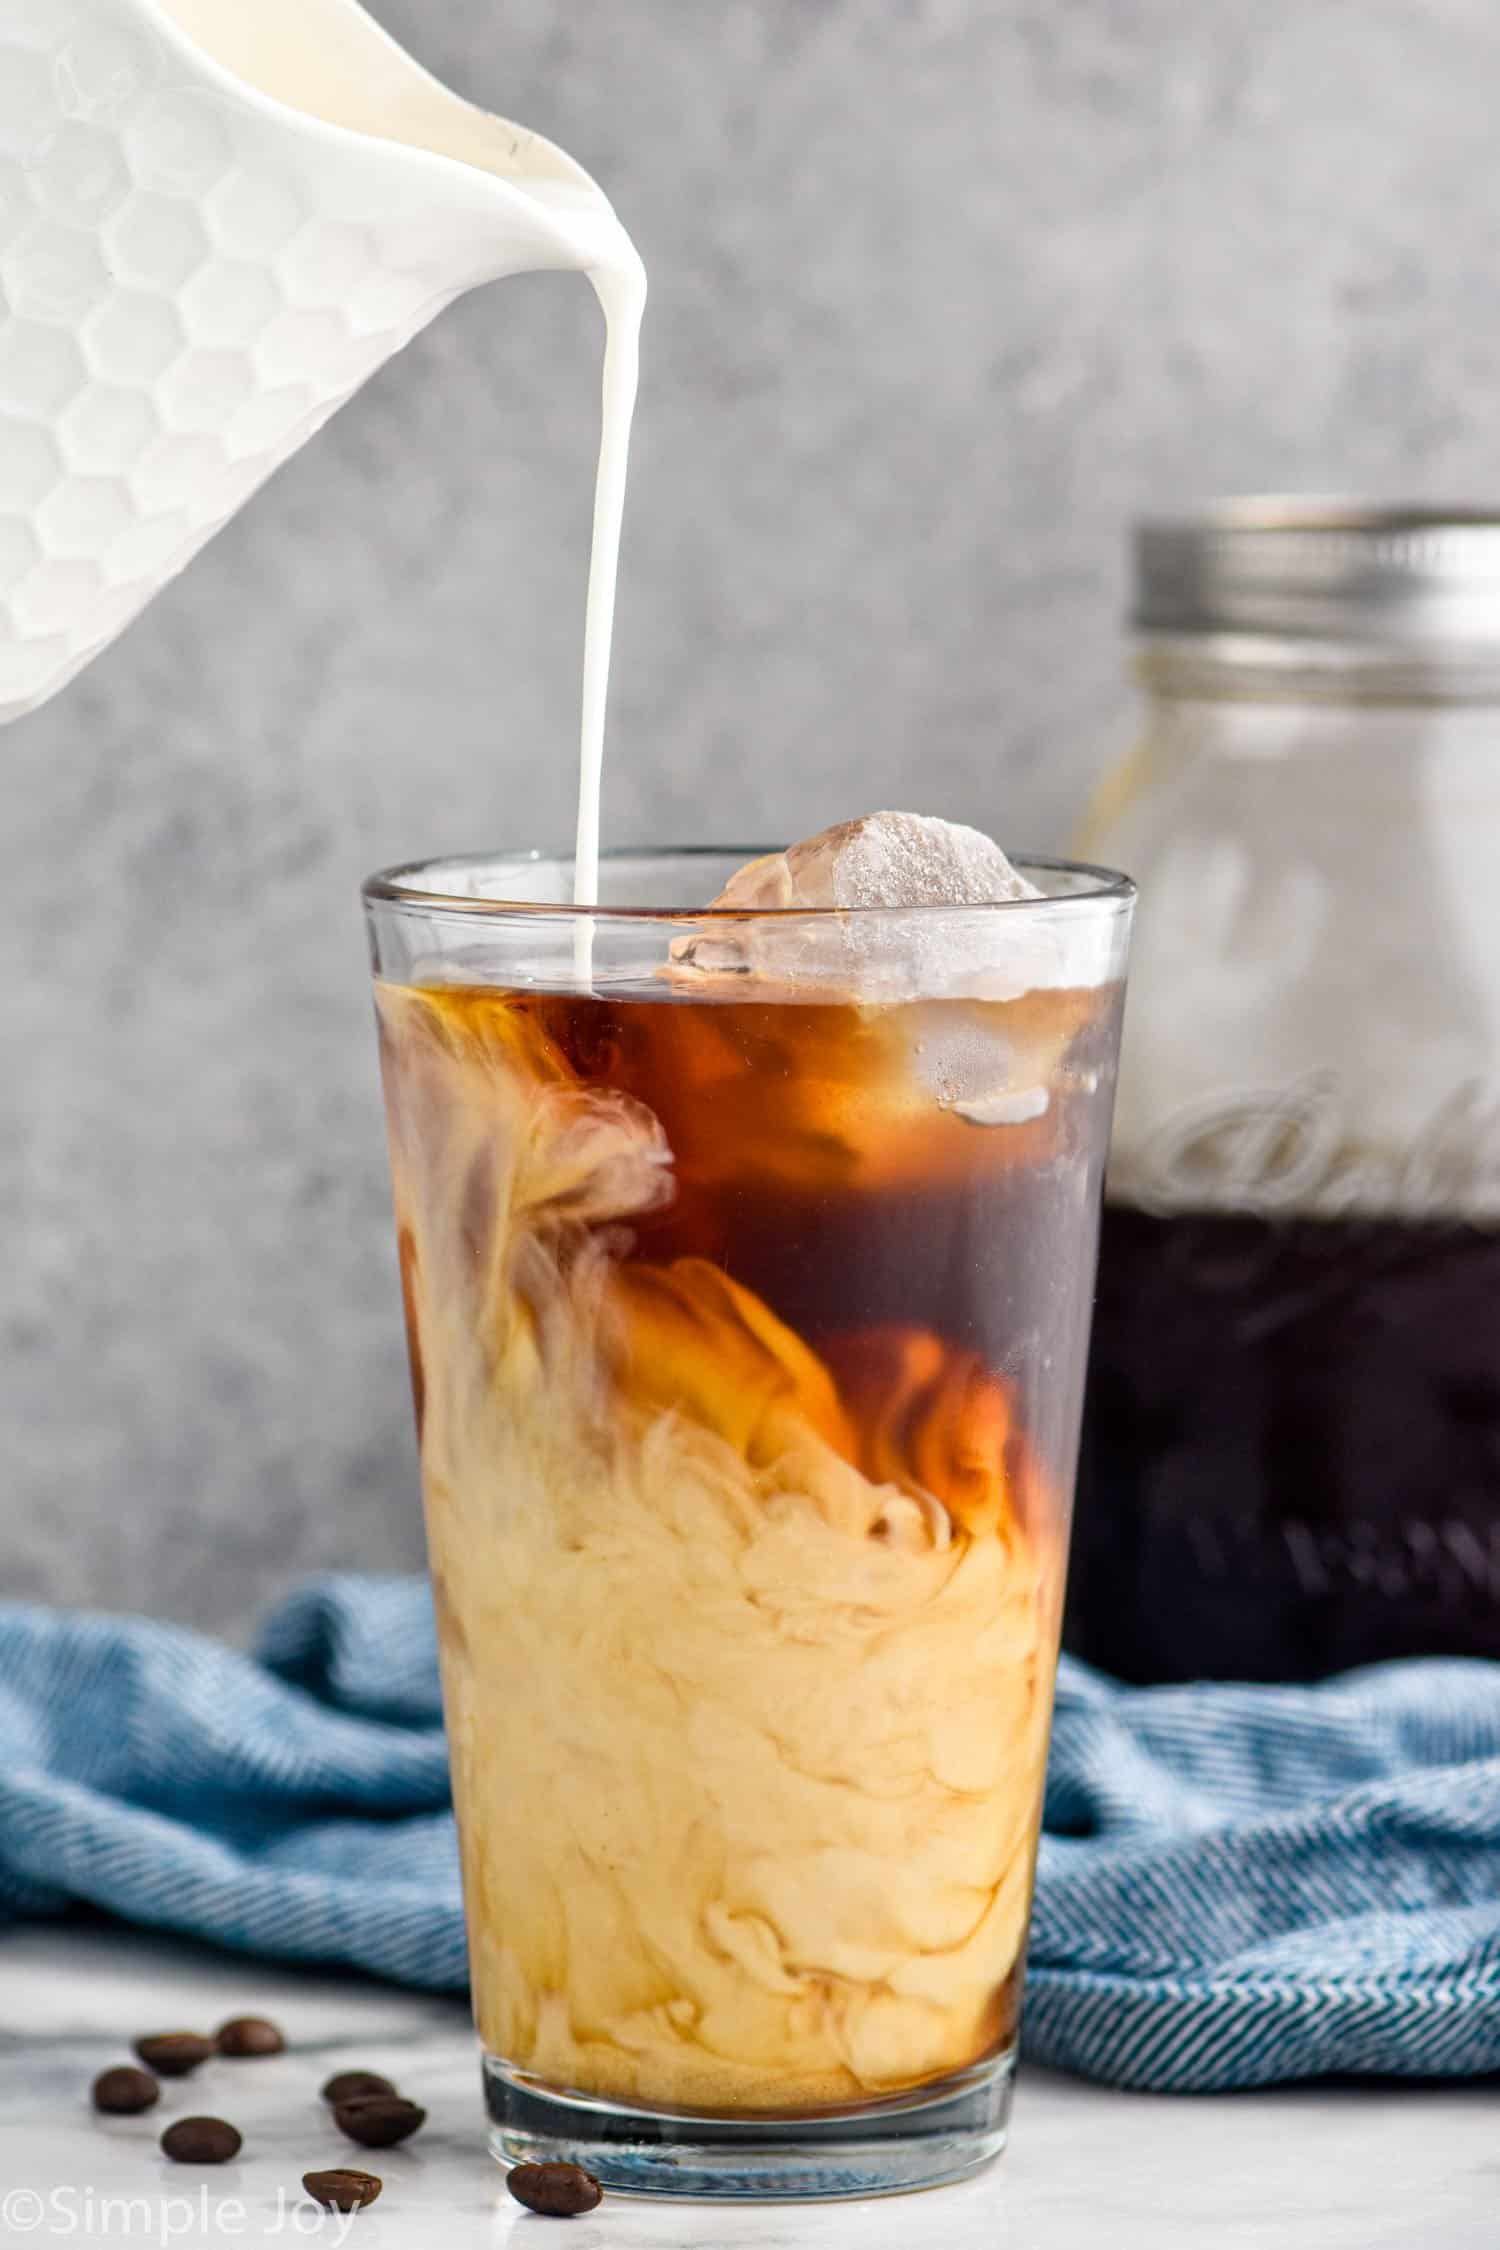 How to make Homemade Cold Brew Coffee {Recipe} - The Schmidty Wife